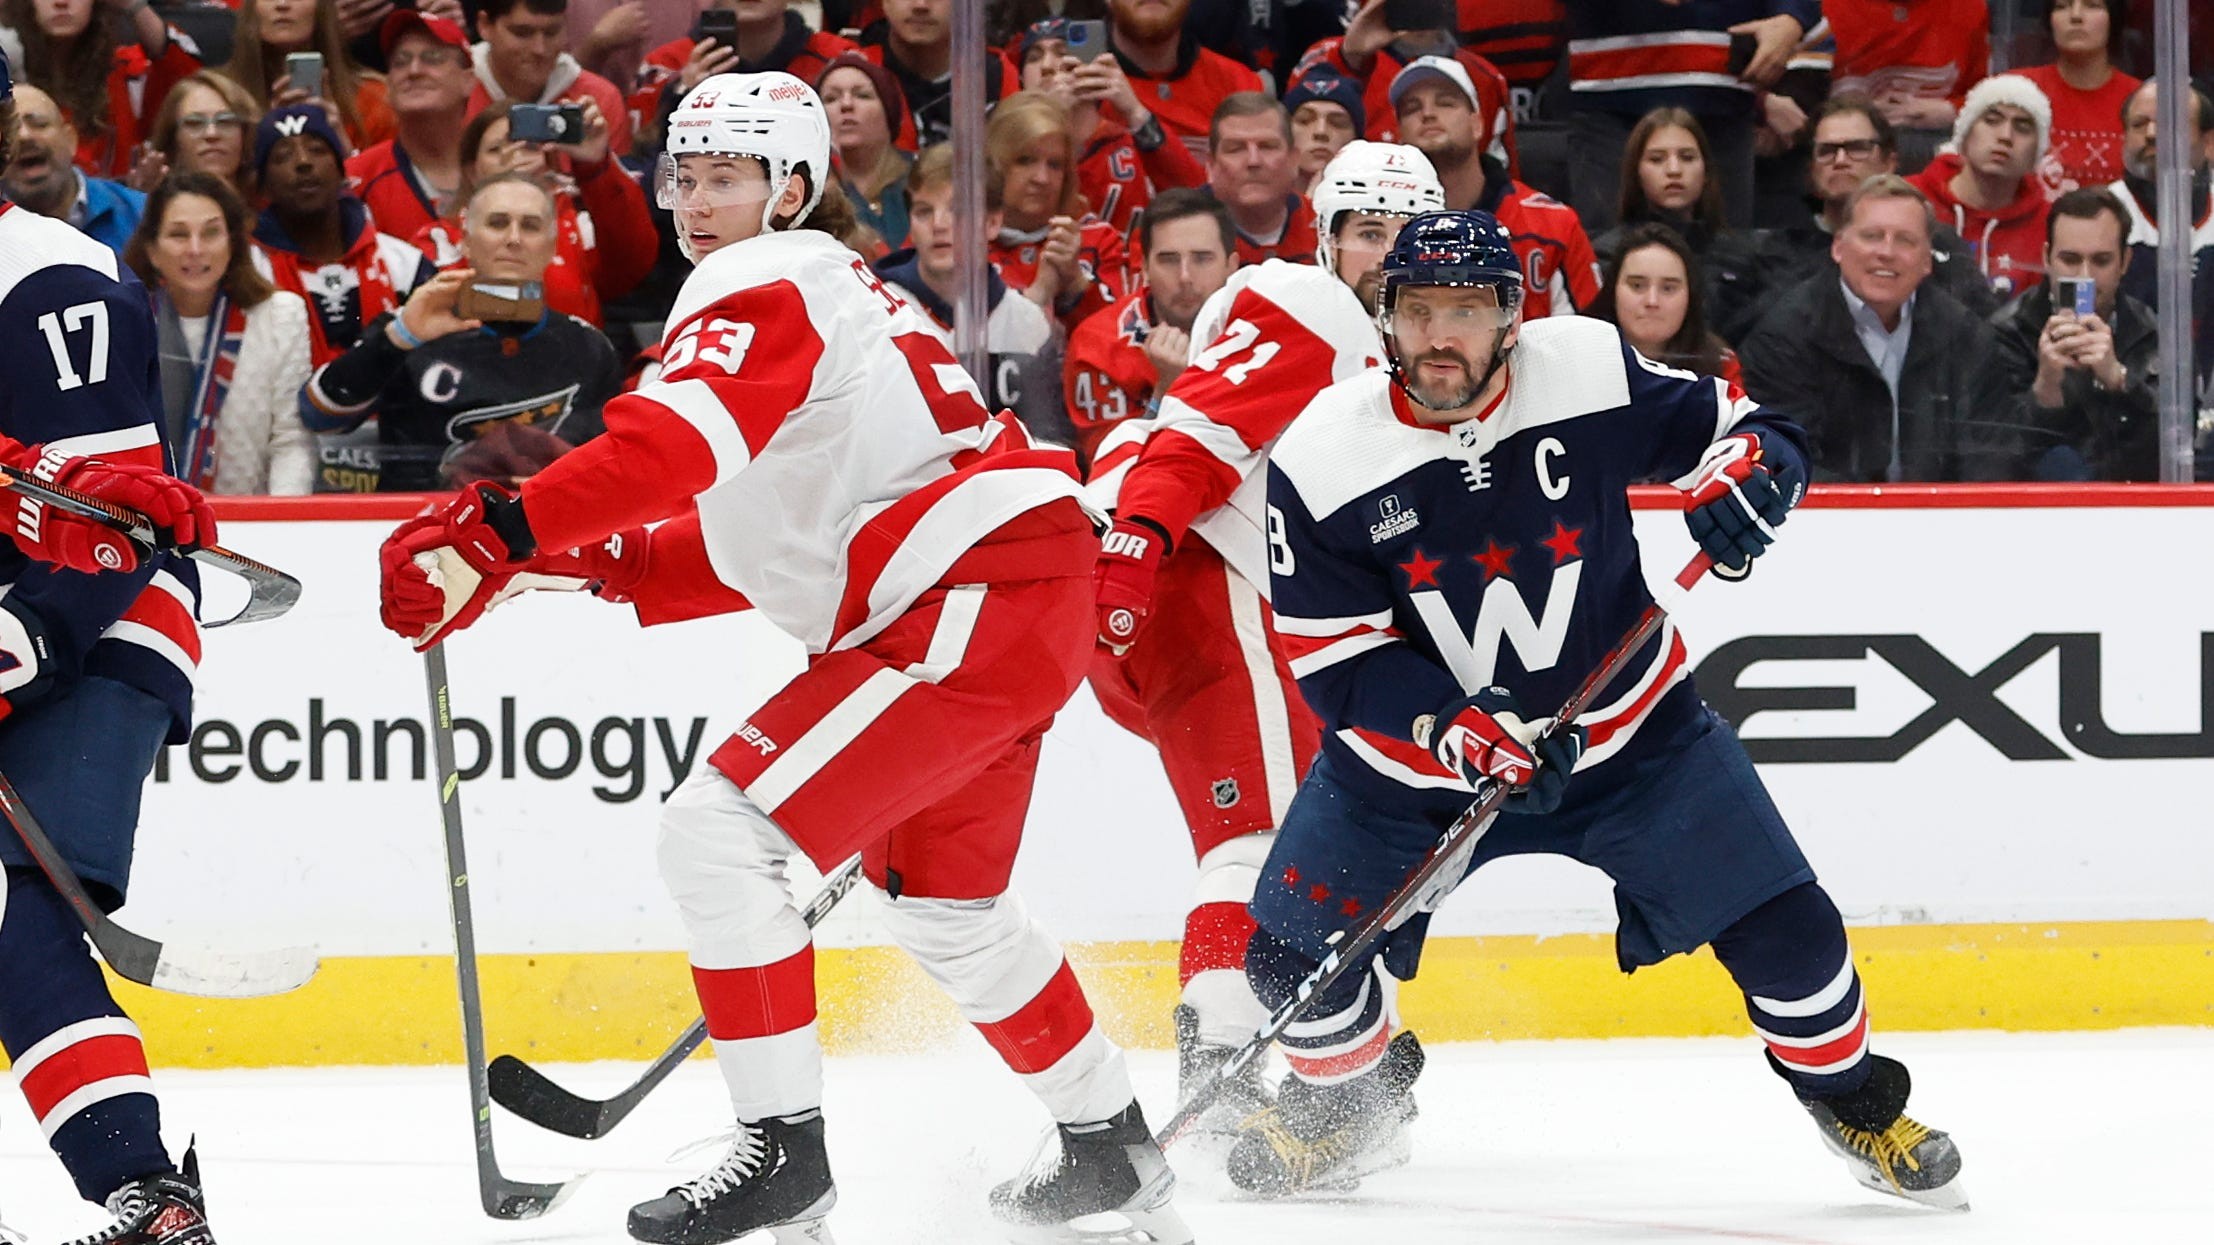 Detroit Red Wings game vs. Washington Capitals: Time, TV channel, more info